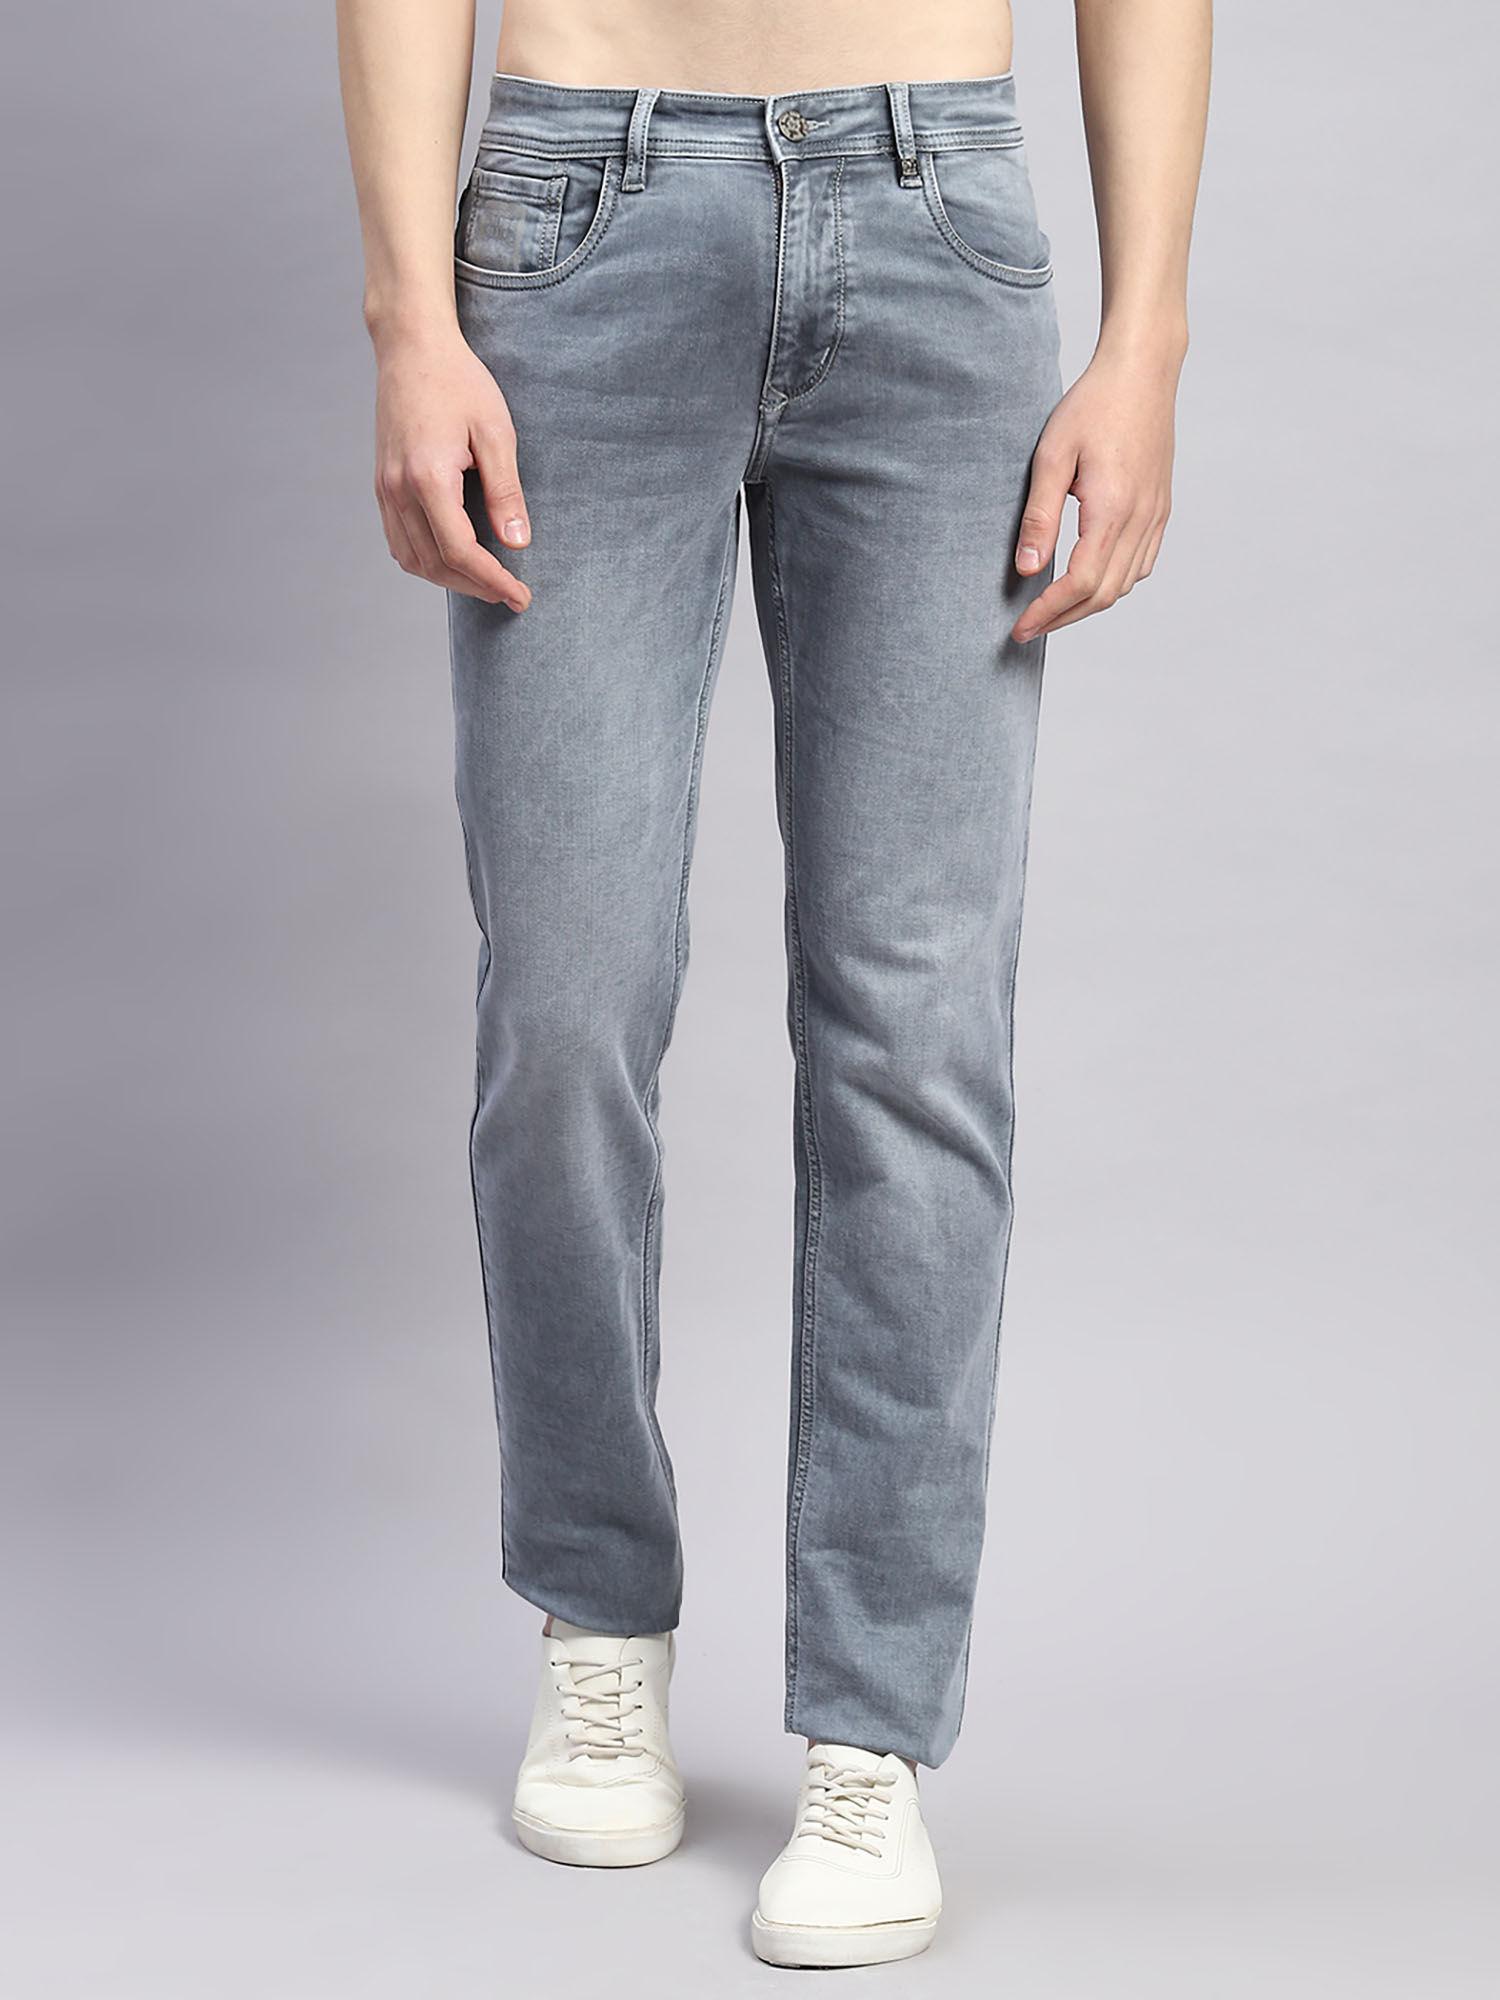 mens-grey-light-wash-cotton-blend-straight-fit-casual-jeans